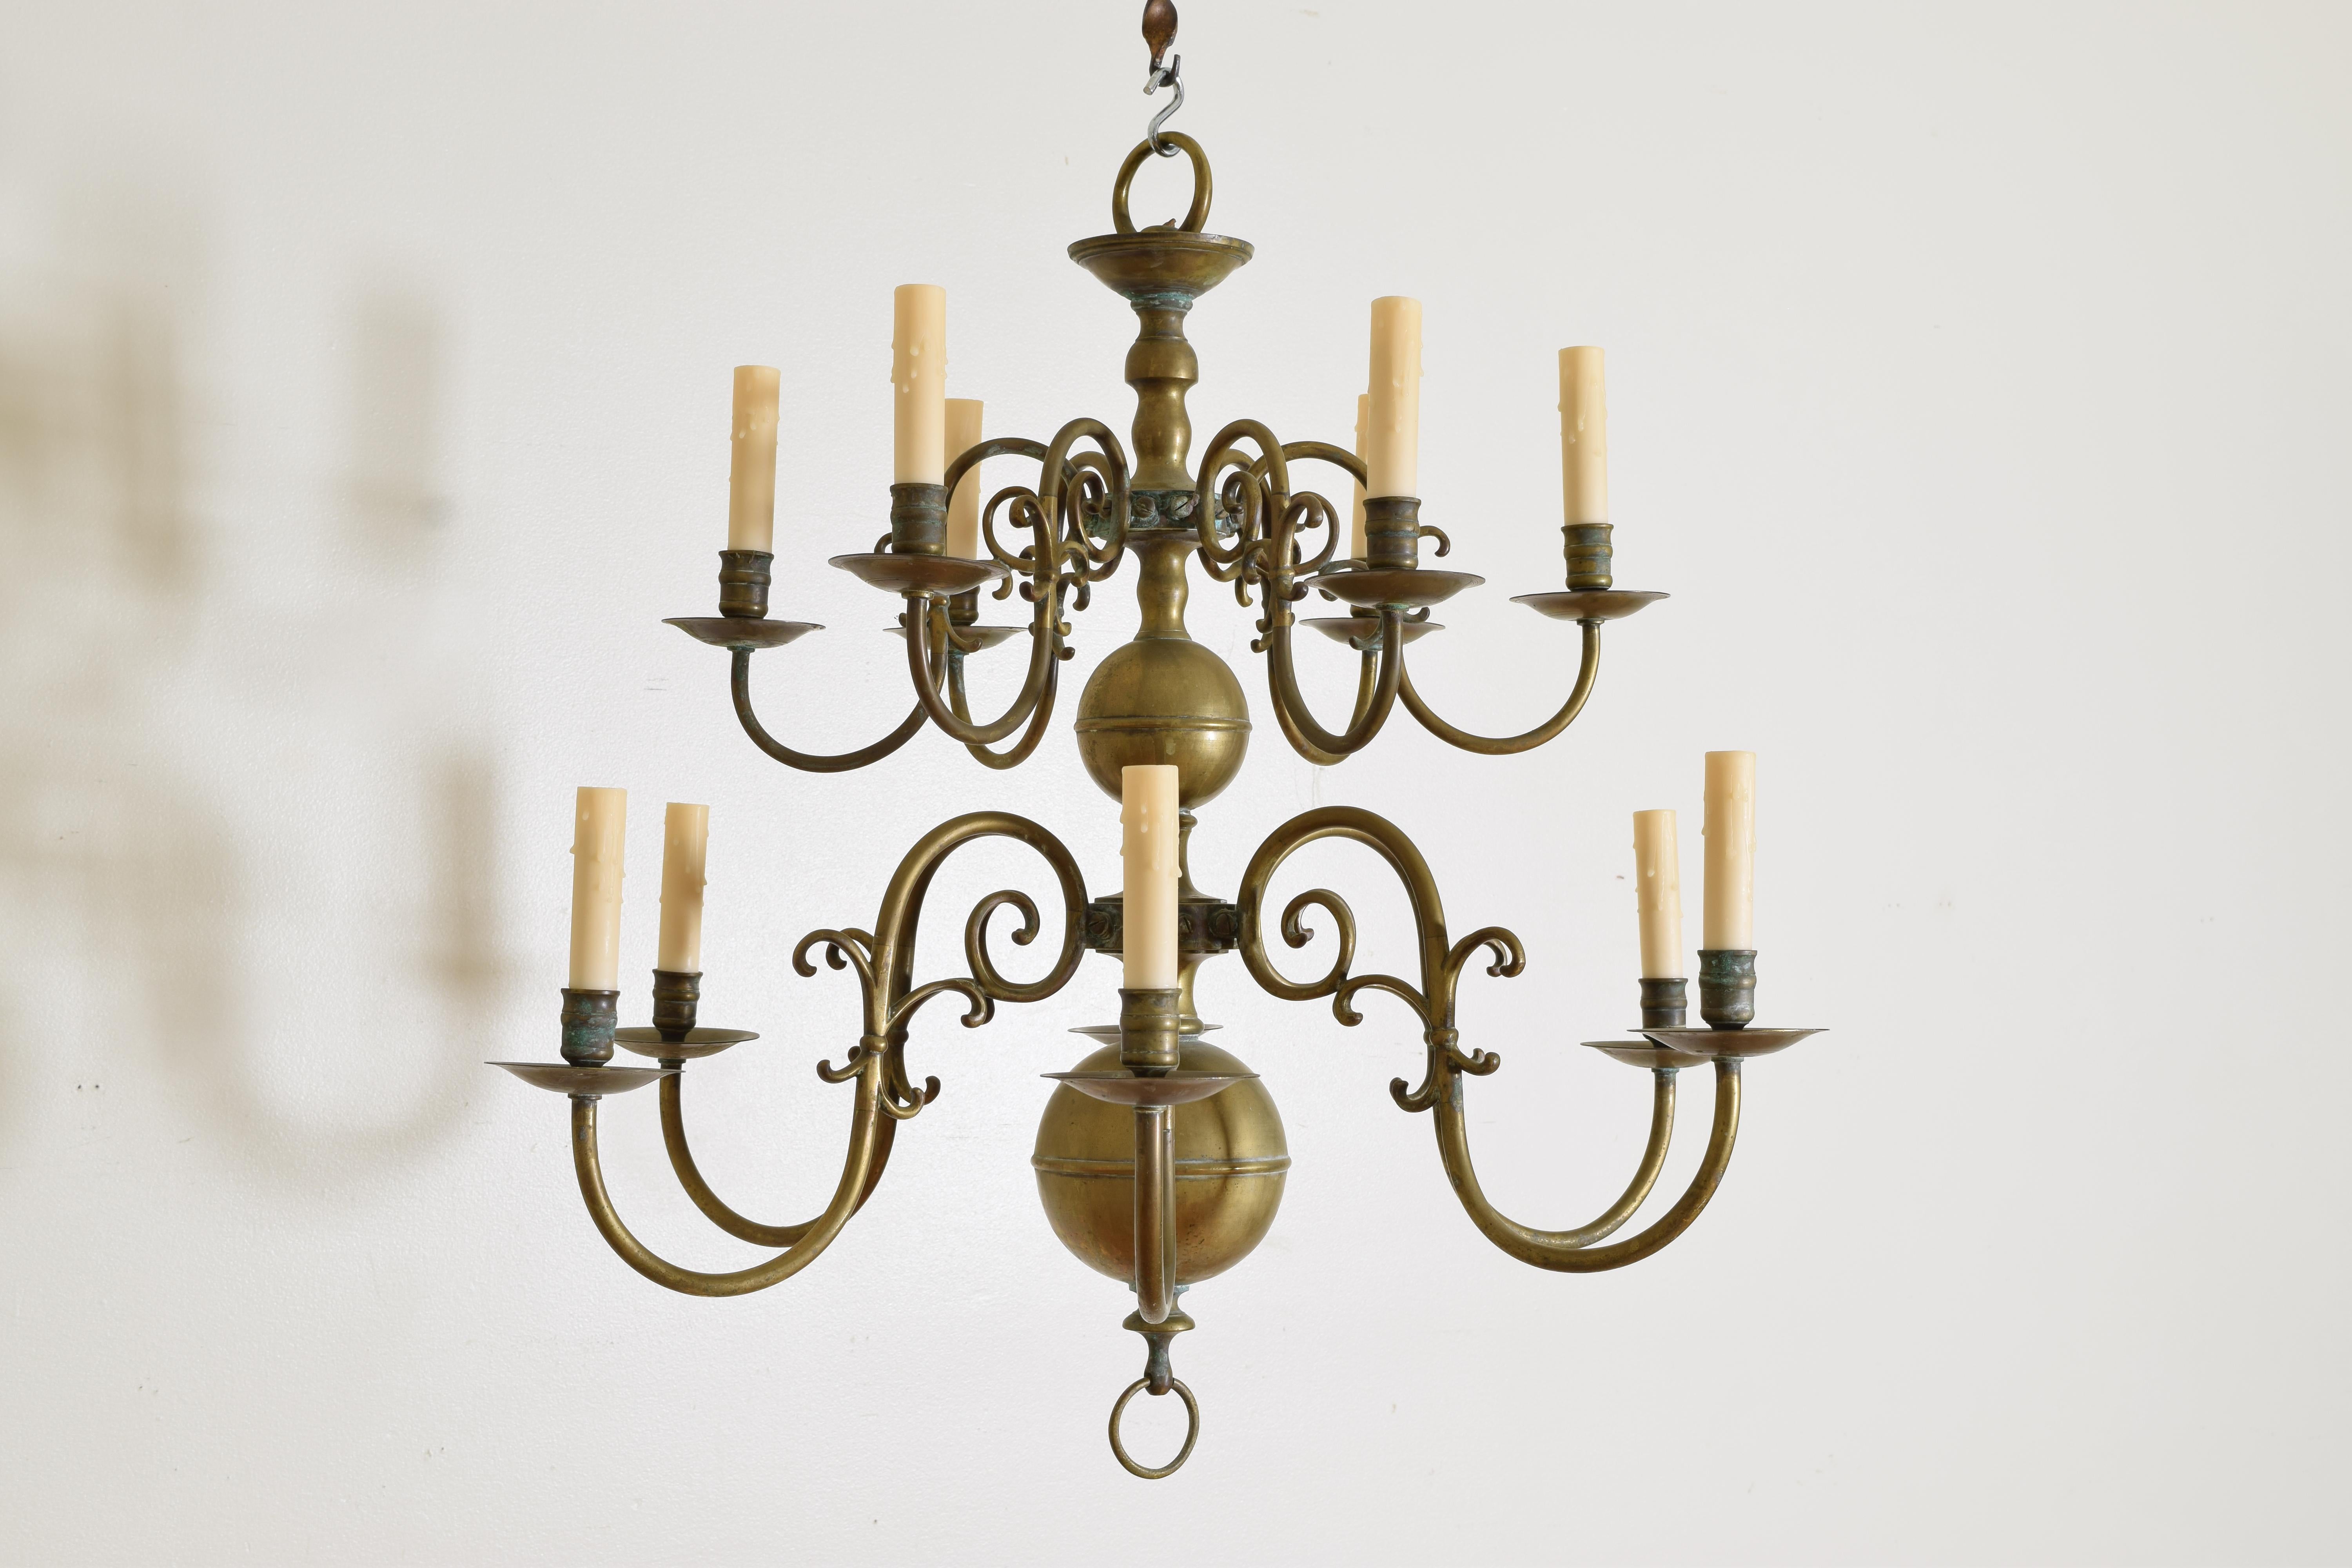 Baroque Dutch or French Patinated Brass 2-Tier 12-Light Chandelier, 2nd half 19th cen. For Sale